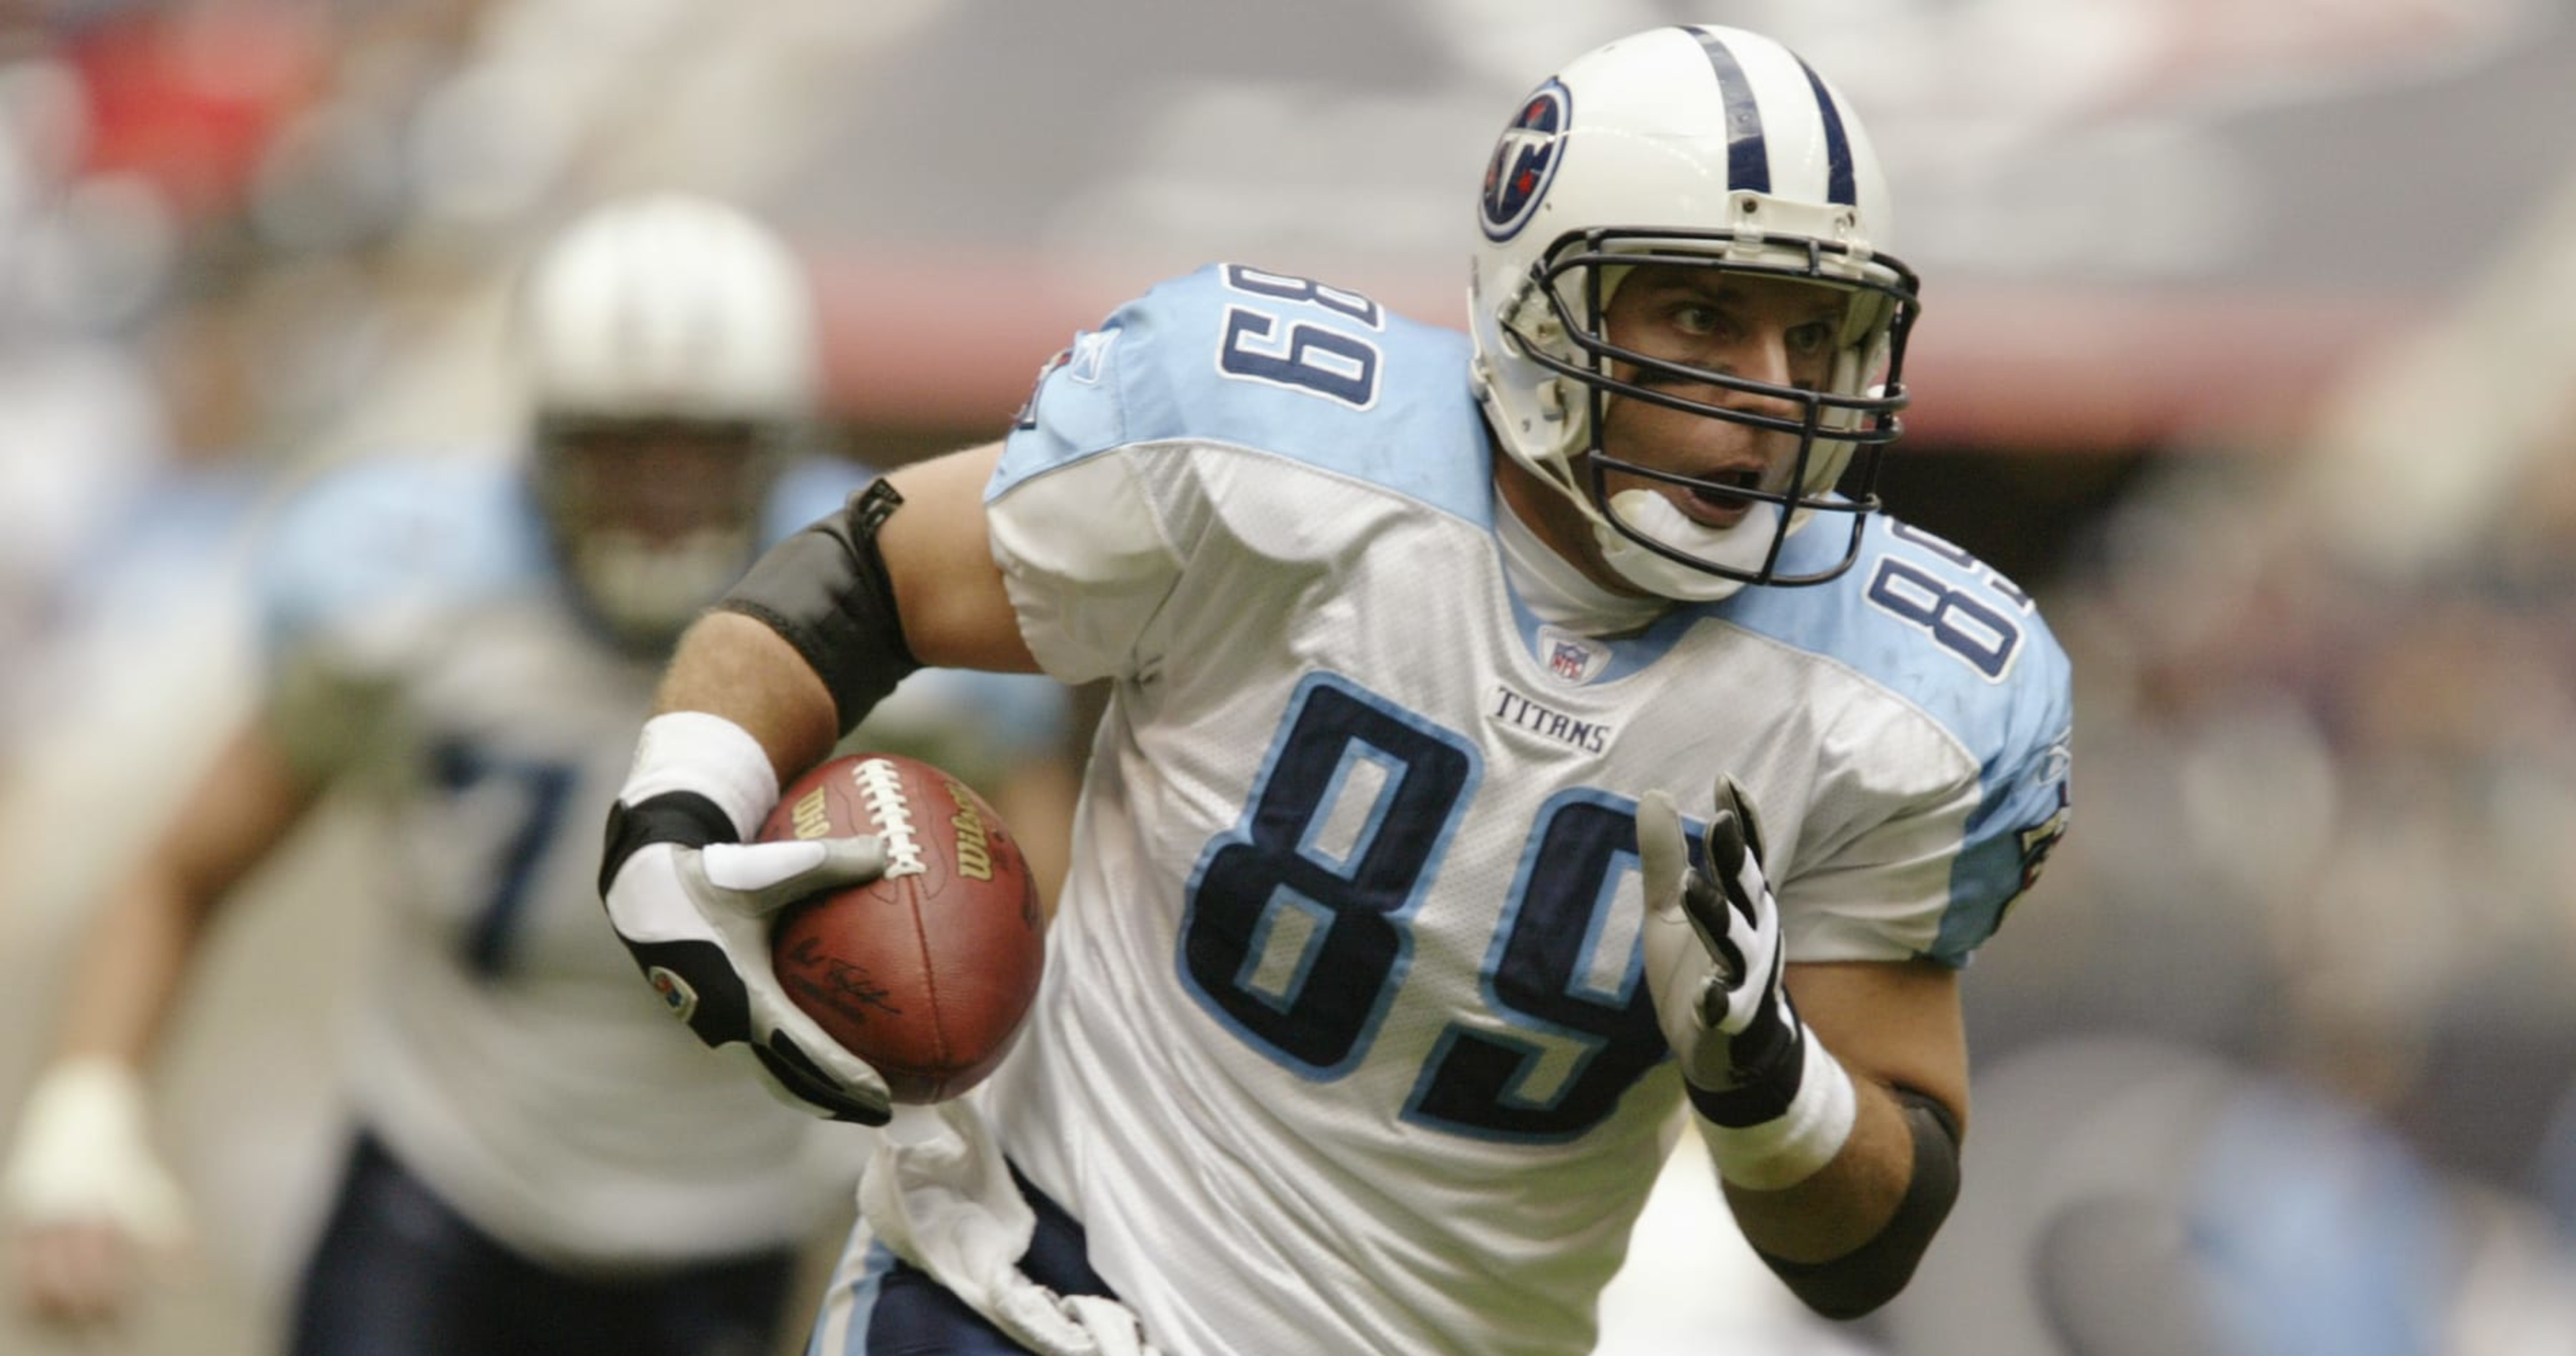 Frank Wycheck Dies at 52; Former NFL TE Earned 3 Pro Bowl Selections with Titans thumbnail